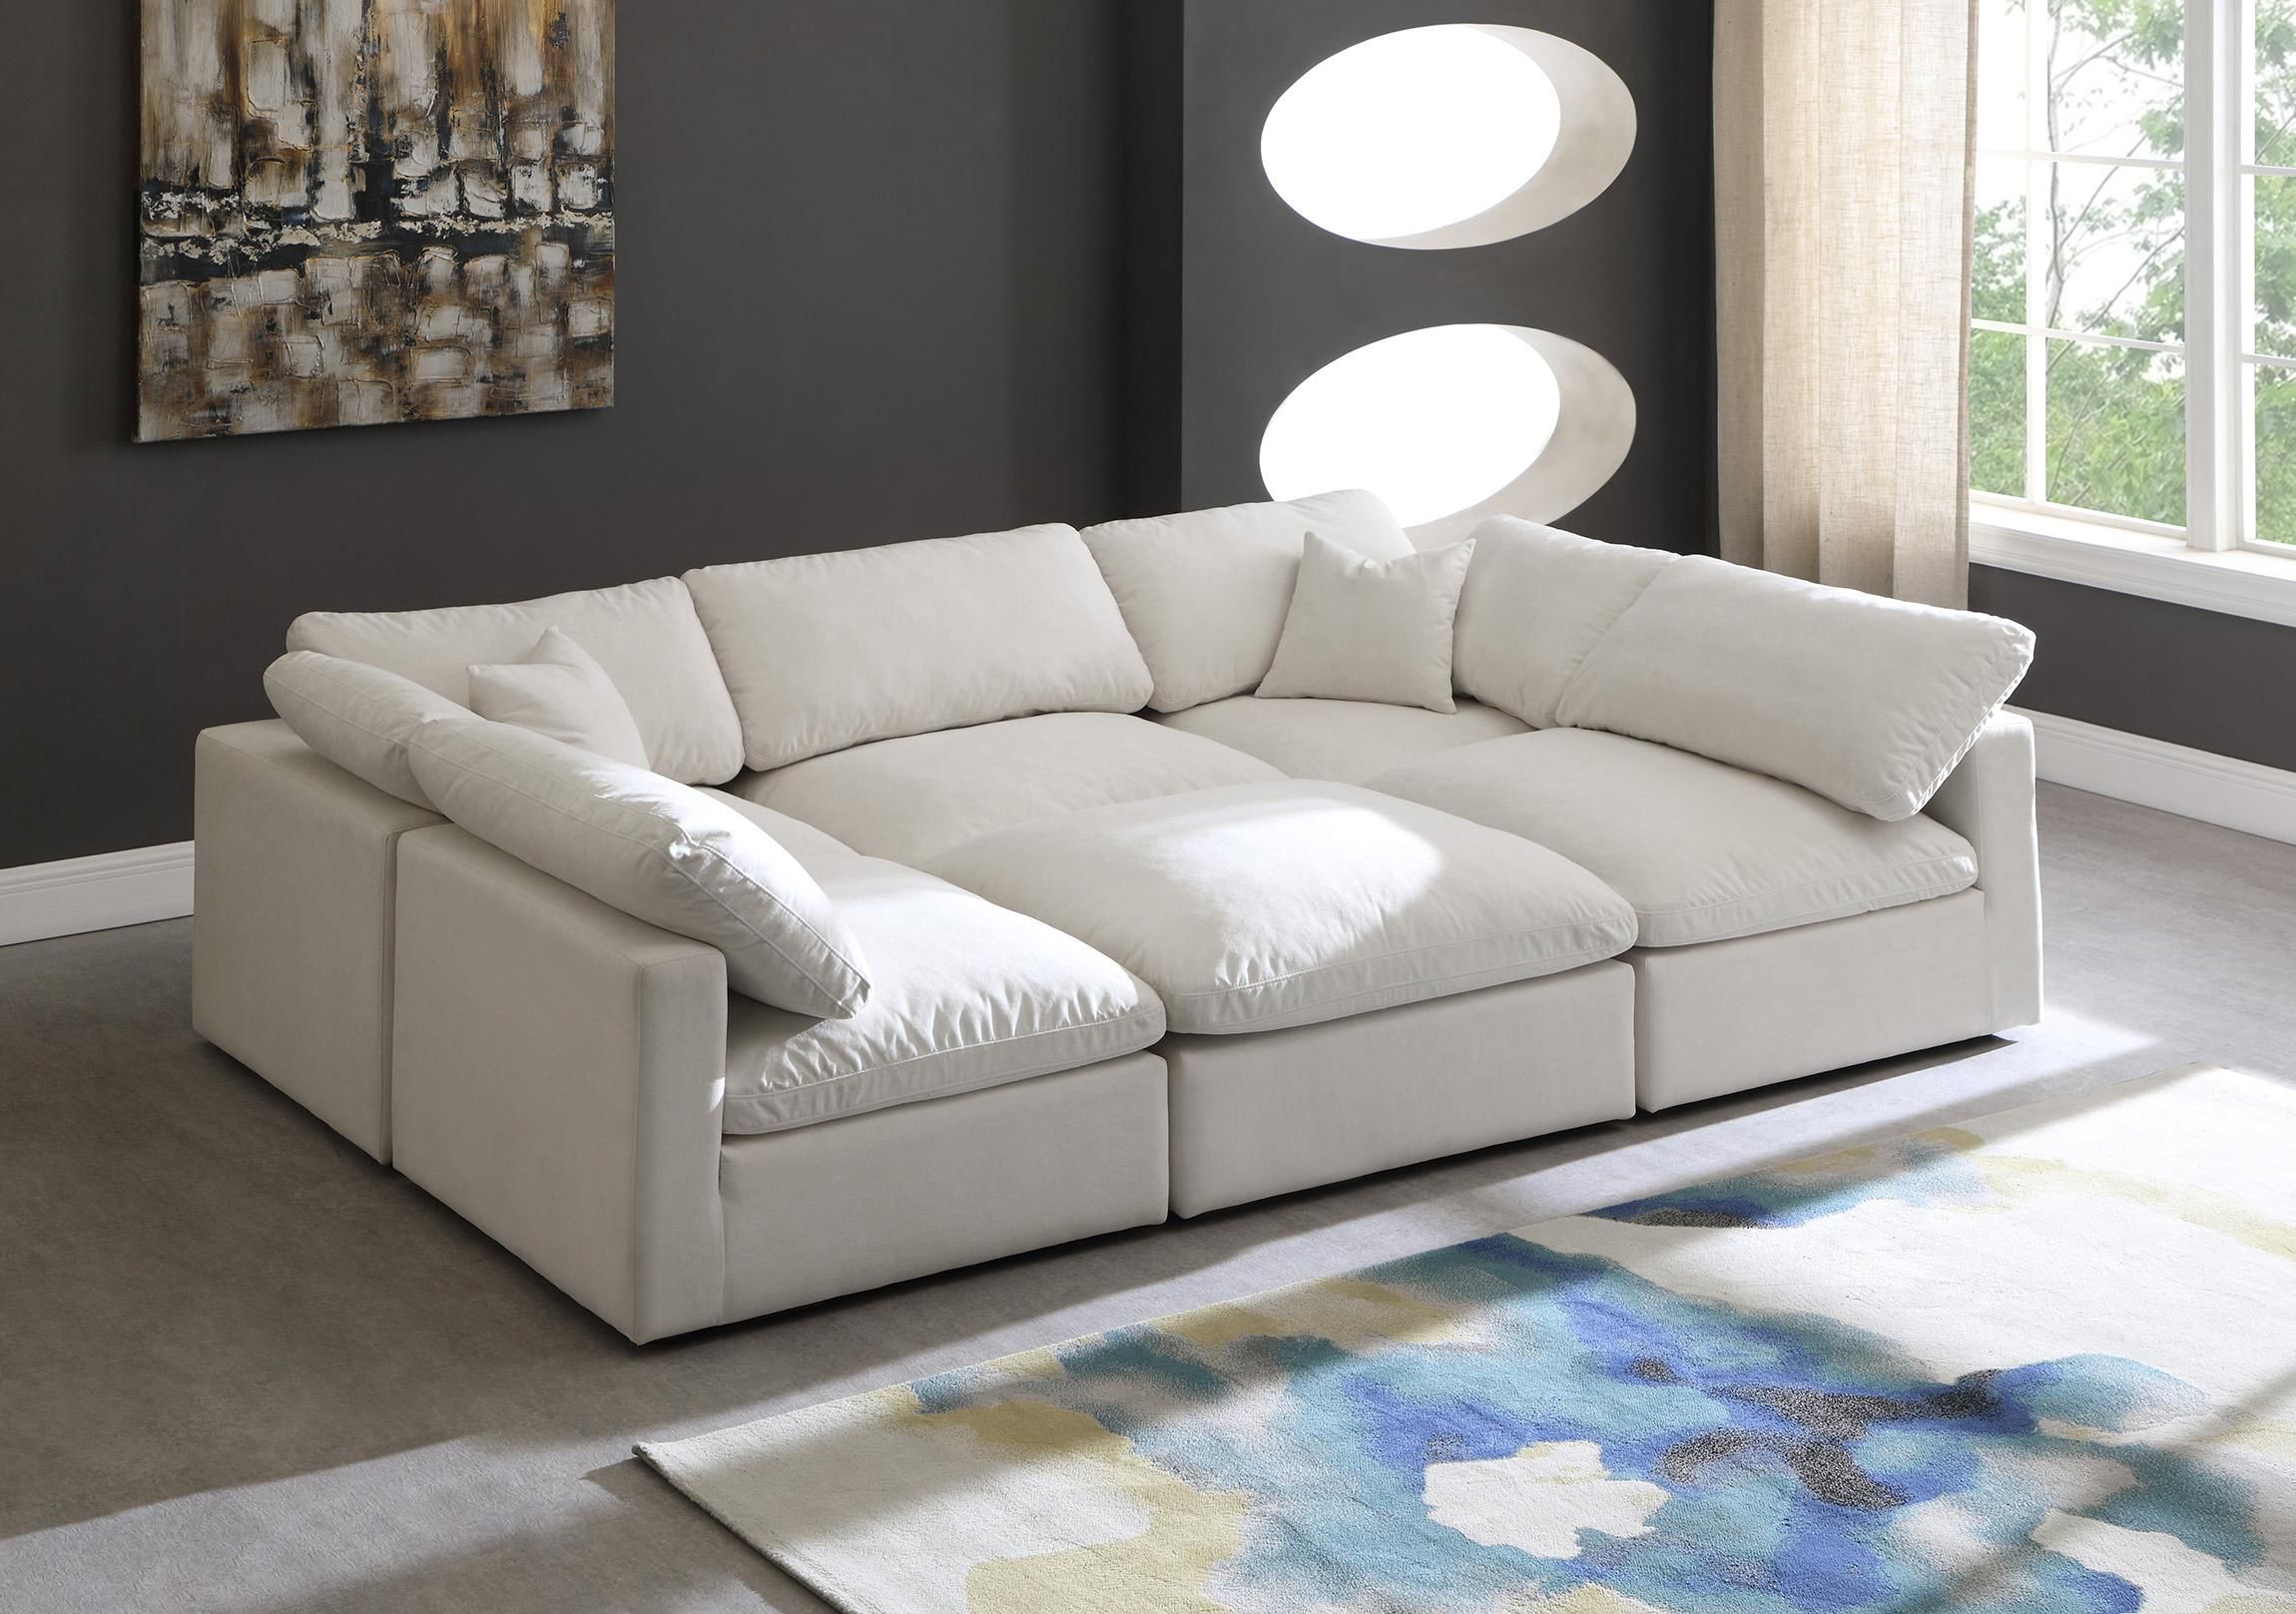 Cream Velvet Cloud 6c Modular Down Filled Reversible Sectional Soflex  Modern – Buy Online On Ny Furniture Outlet With Regard To Cream Velvet Modular Sectionals (View 10 of 15)